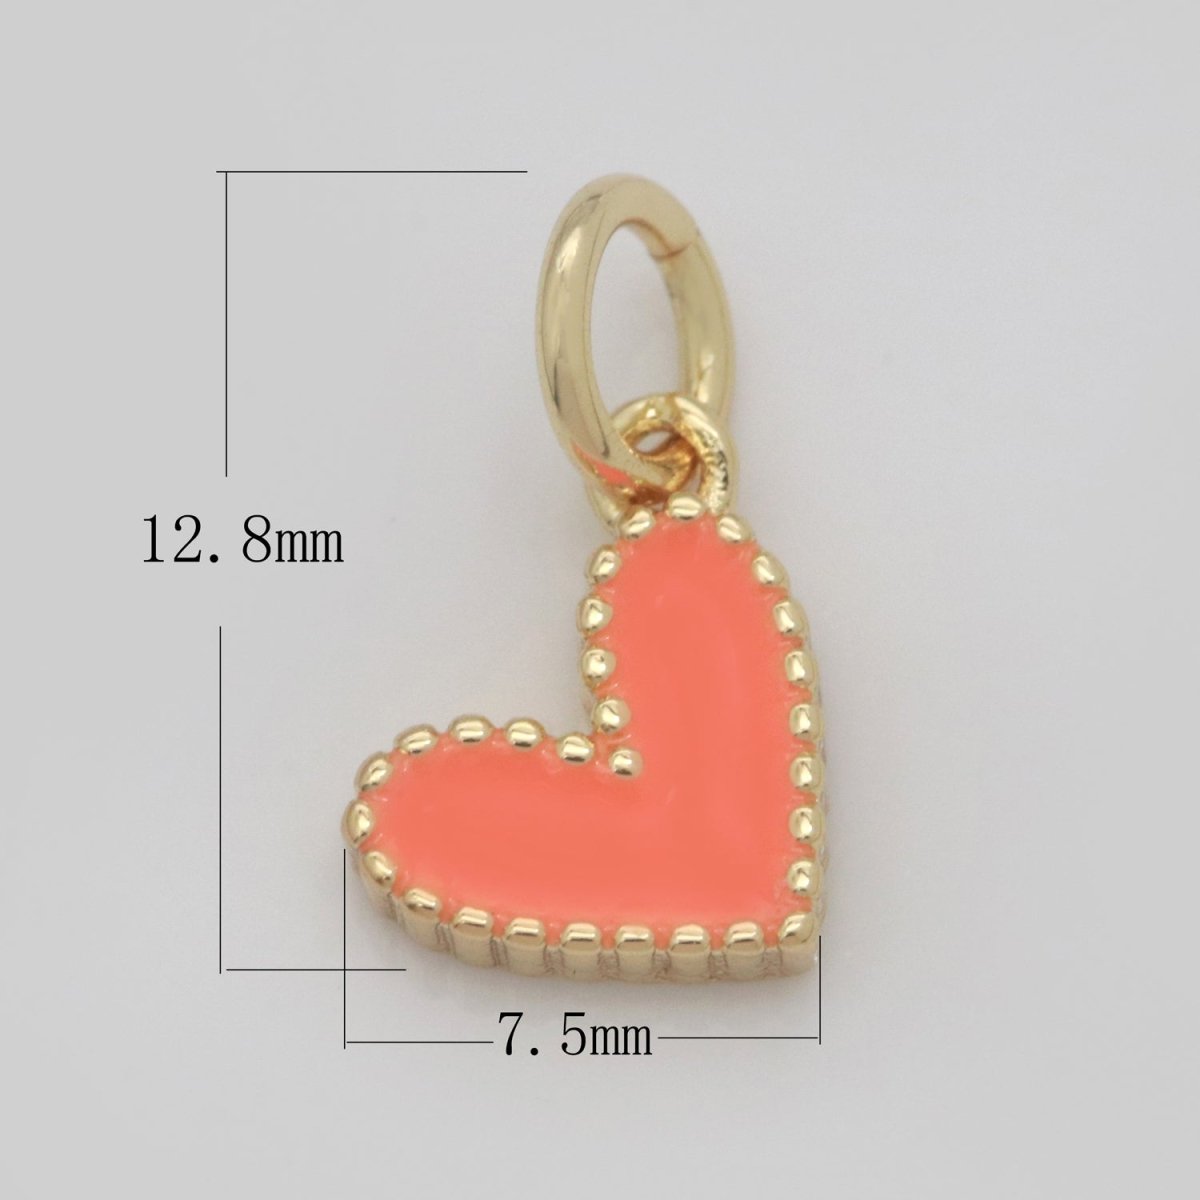 Small Gold Heart Charm - Dainty Enamel Mini Heart Add On Charm Tiny Colorful Heart Love Inspired Gold filled Pendant for Necklace Bracelet M-637 M-638 M-640to M-647 - DLUXCA